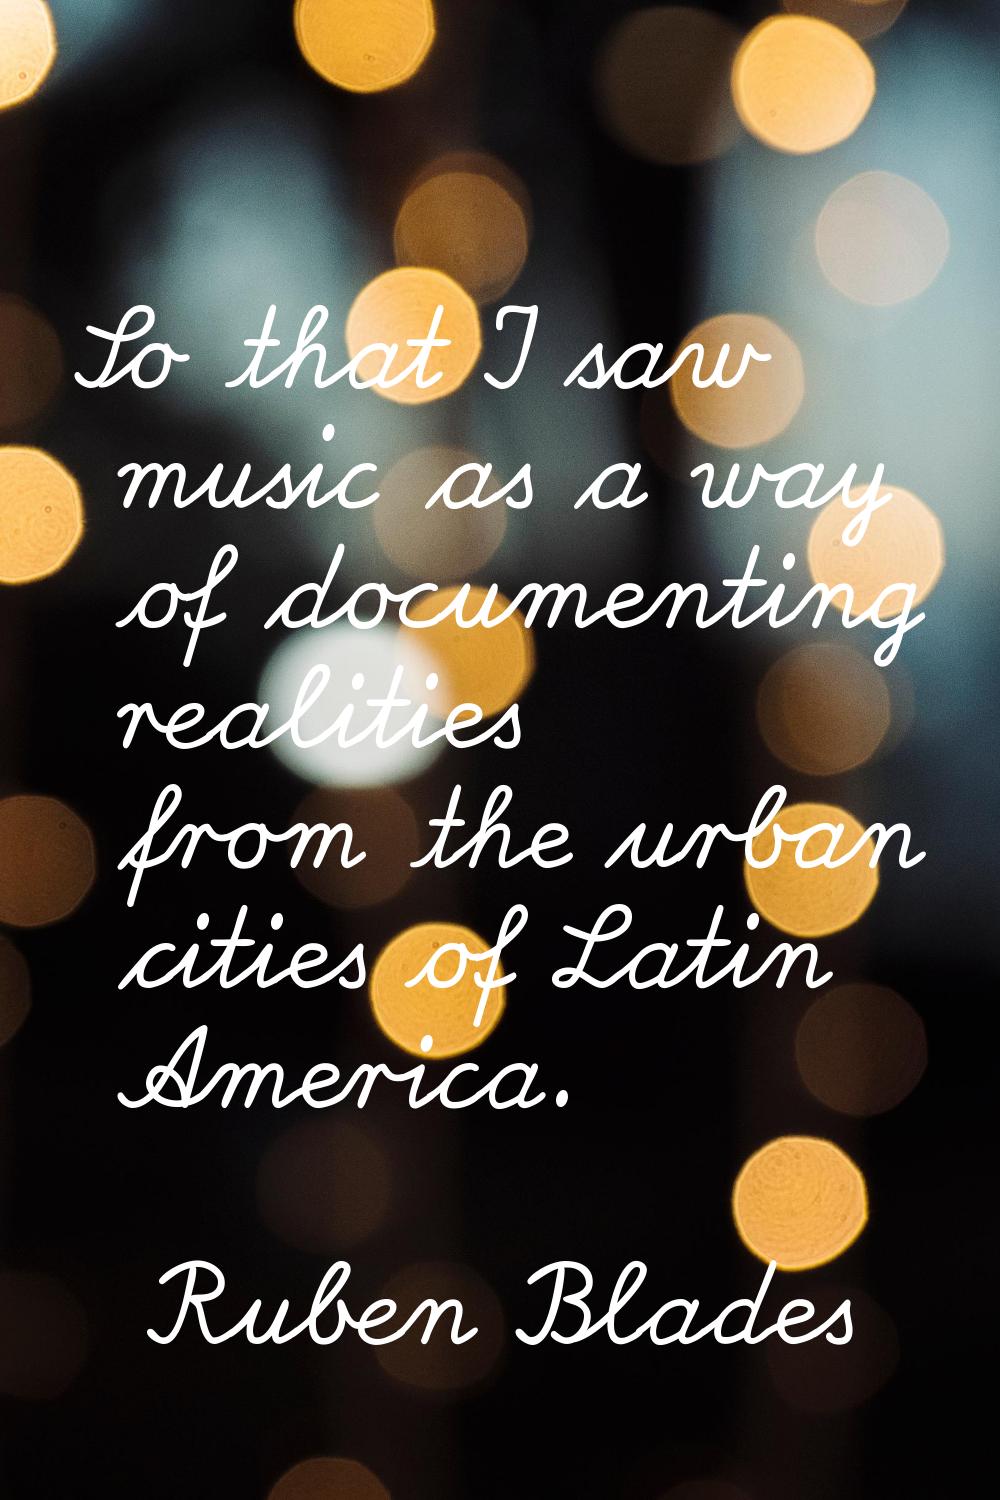 So that I saw music as a way of documenting realities from the urban cities of Latin America.